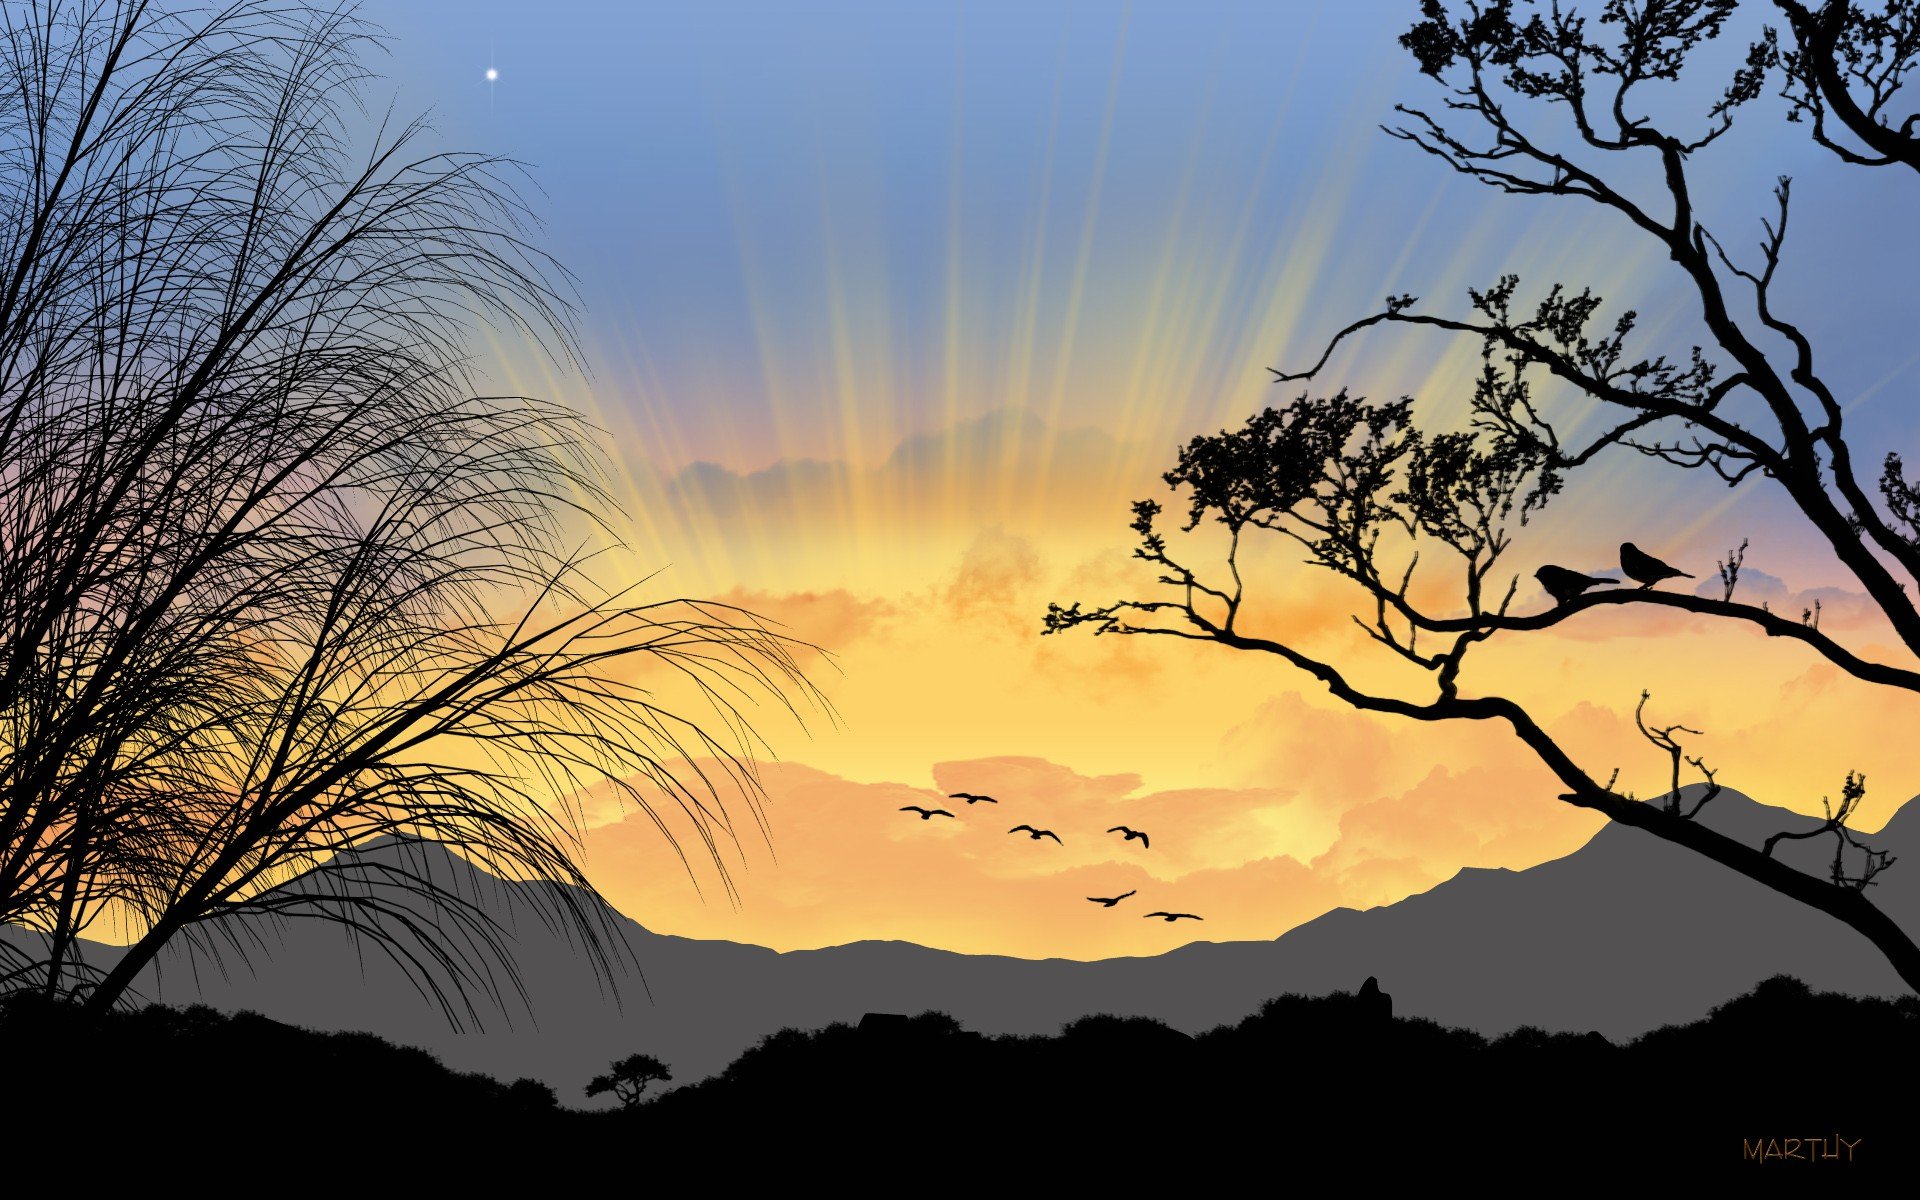 Sunrise trees silhouettes wallpaper 1920x1200 323544 WallpaperUP